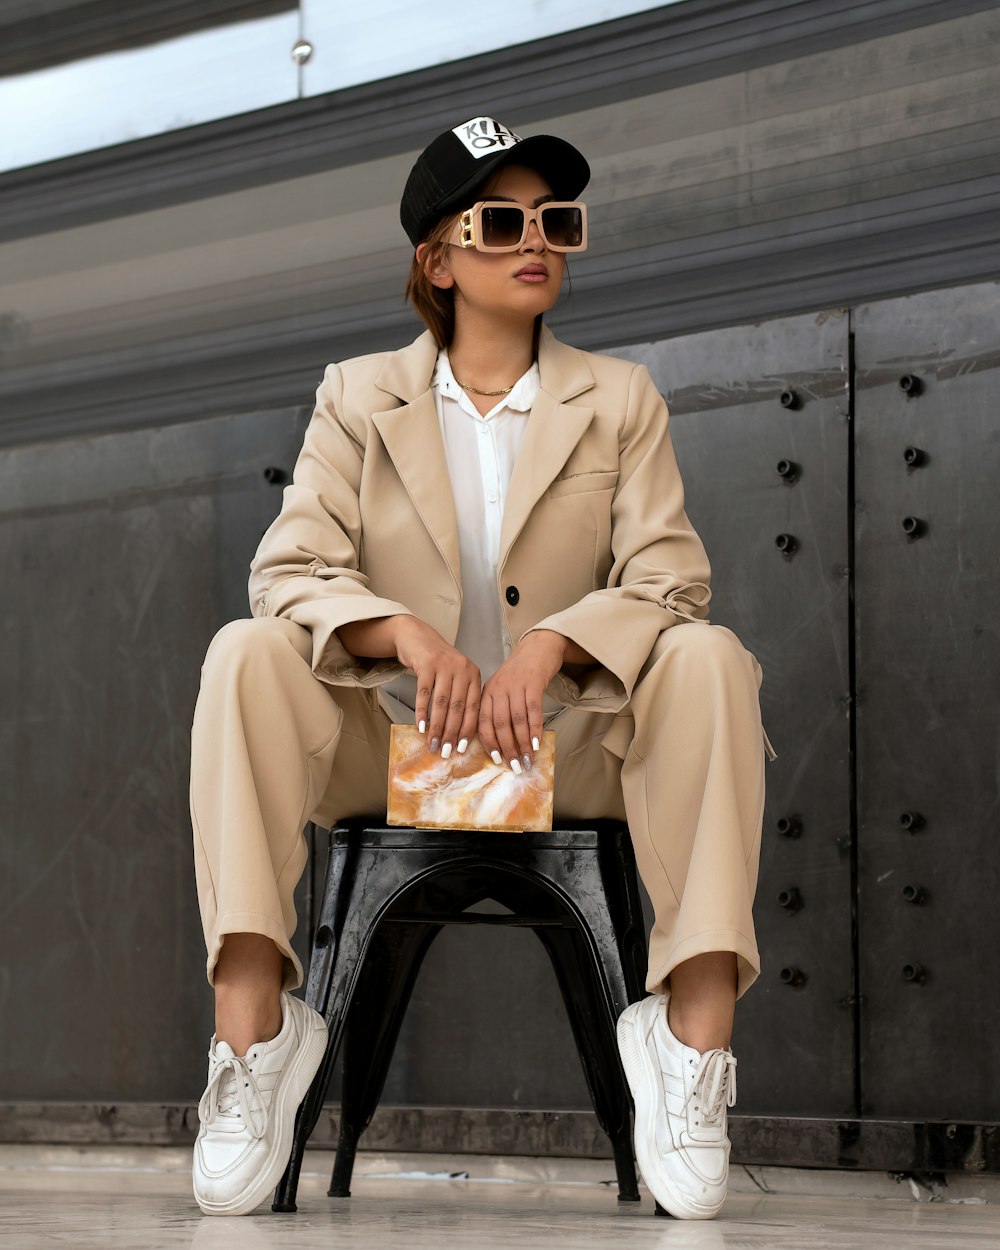 a woman sitting on a chair wearing a hat and sunglasses